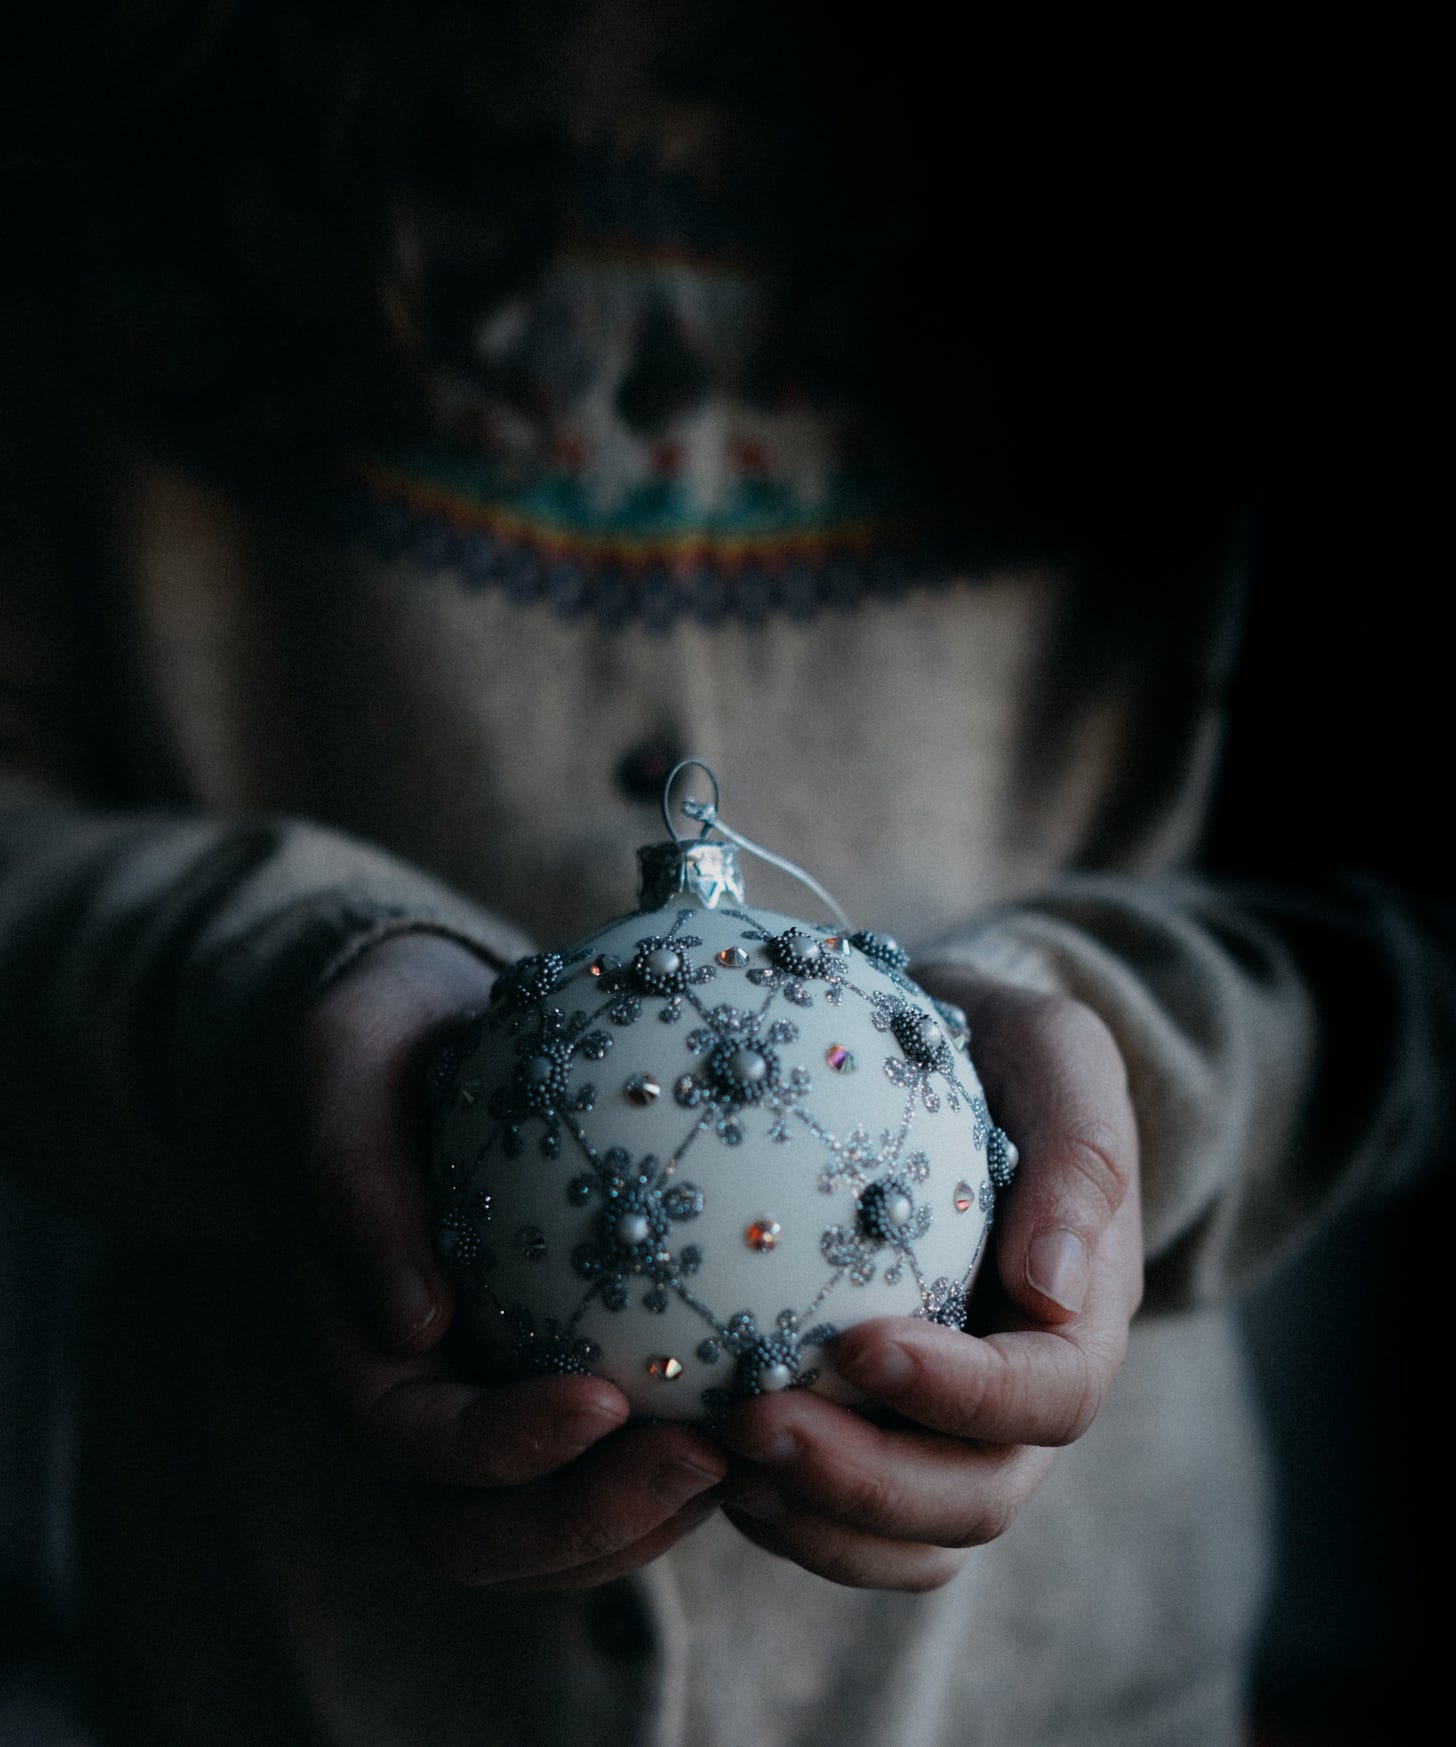 A person holds a beaded gray Christmas ornament